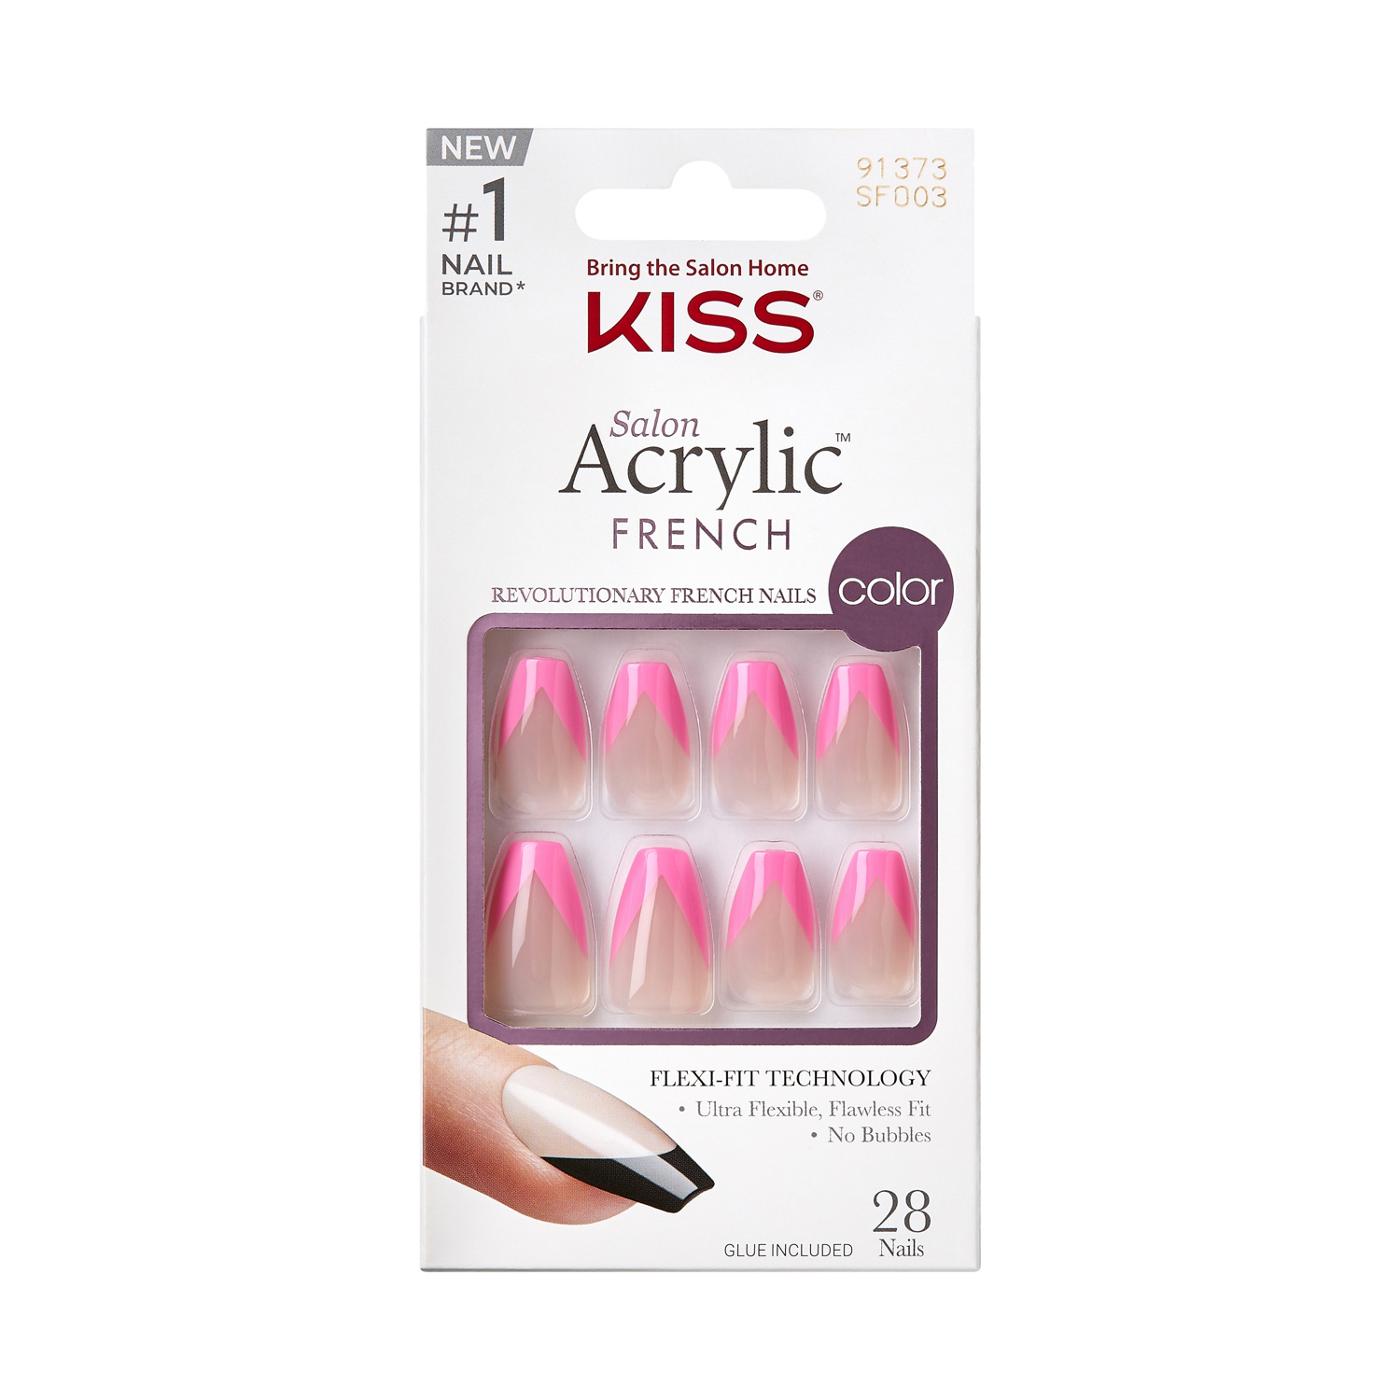 KISS Salon Acrylic French Color - Clear Squared; image 1 of 6